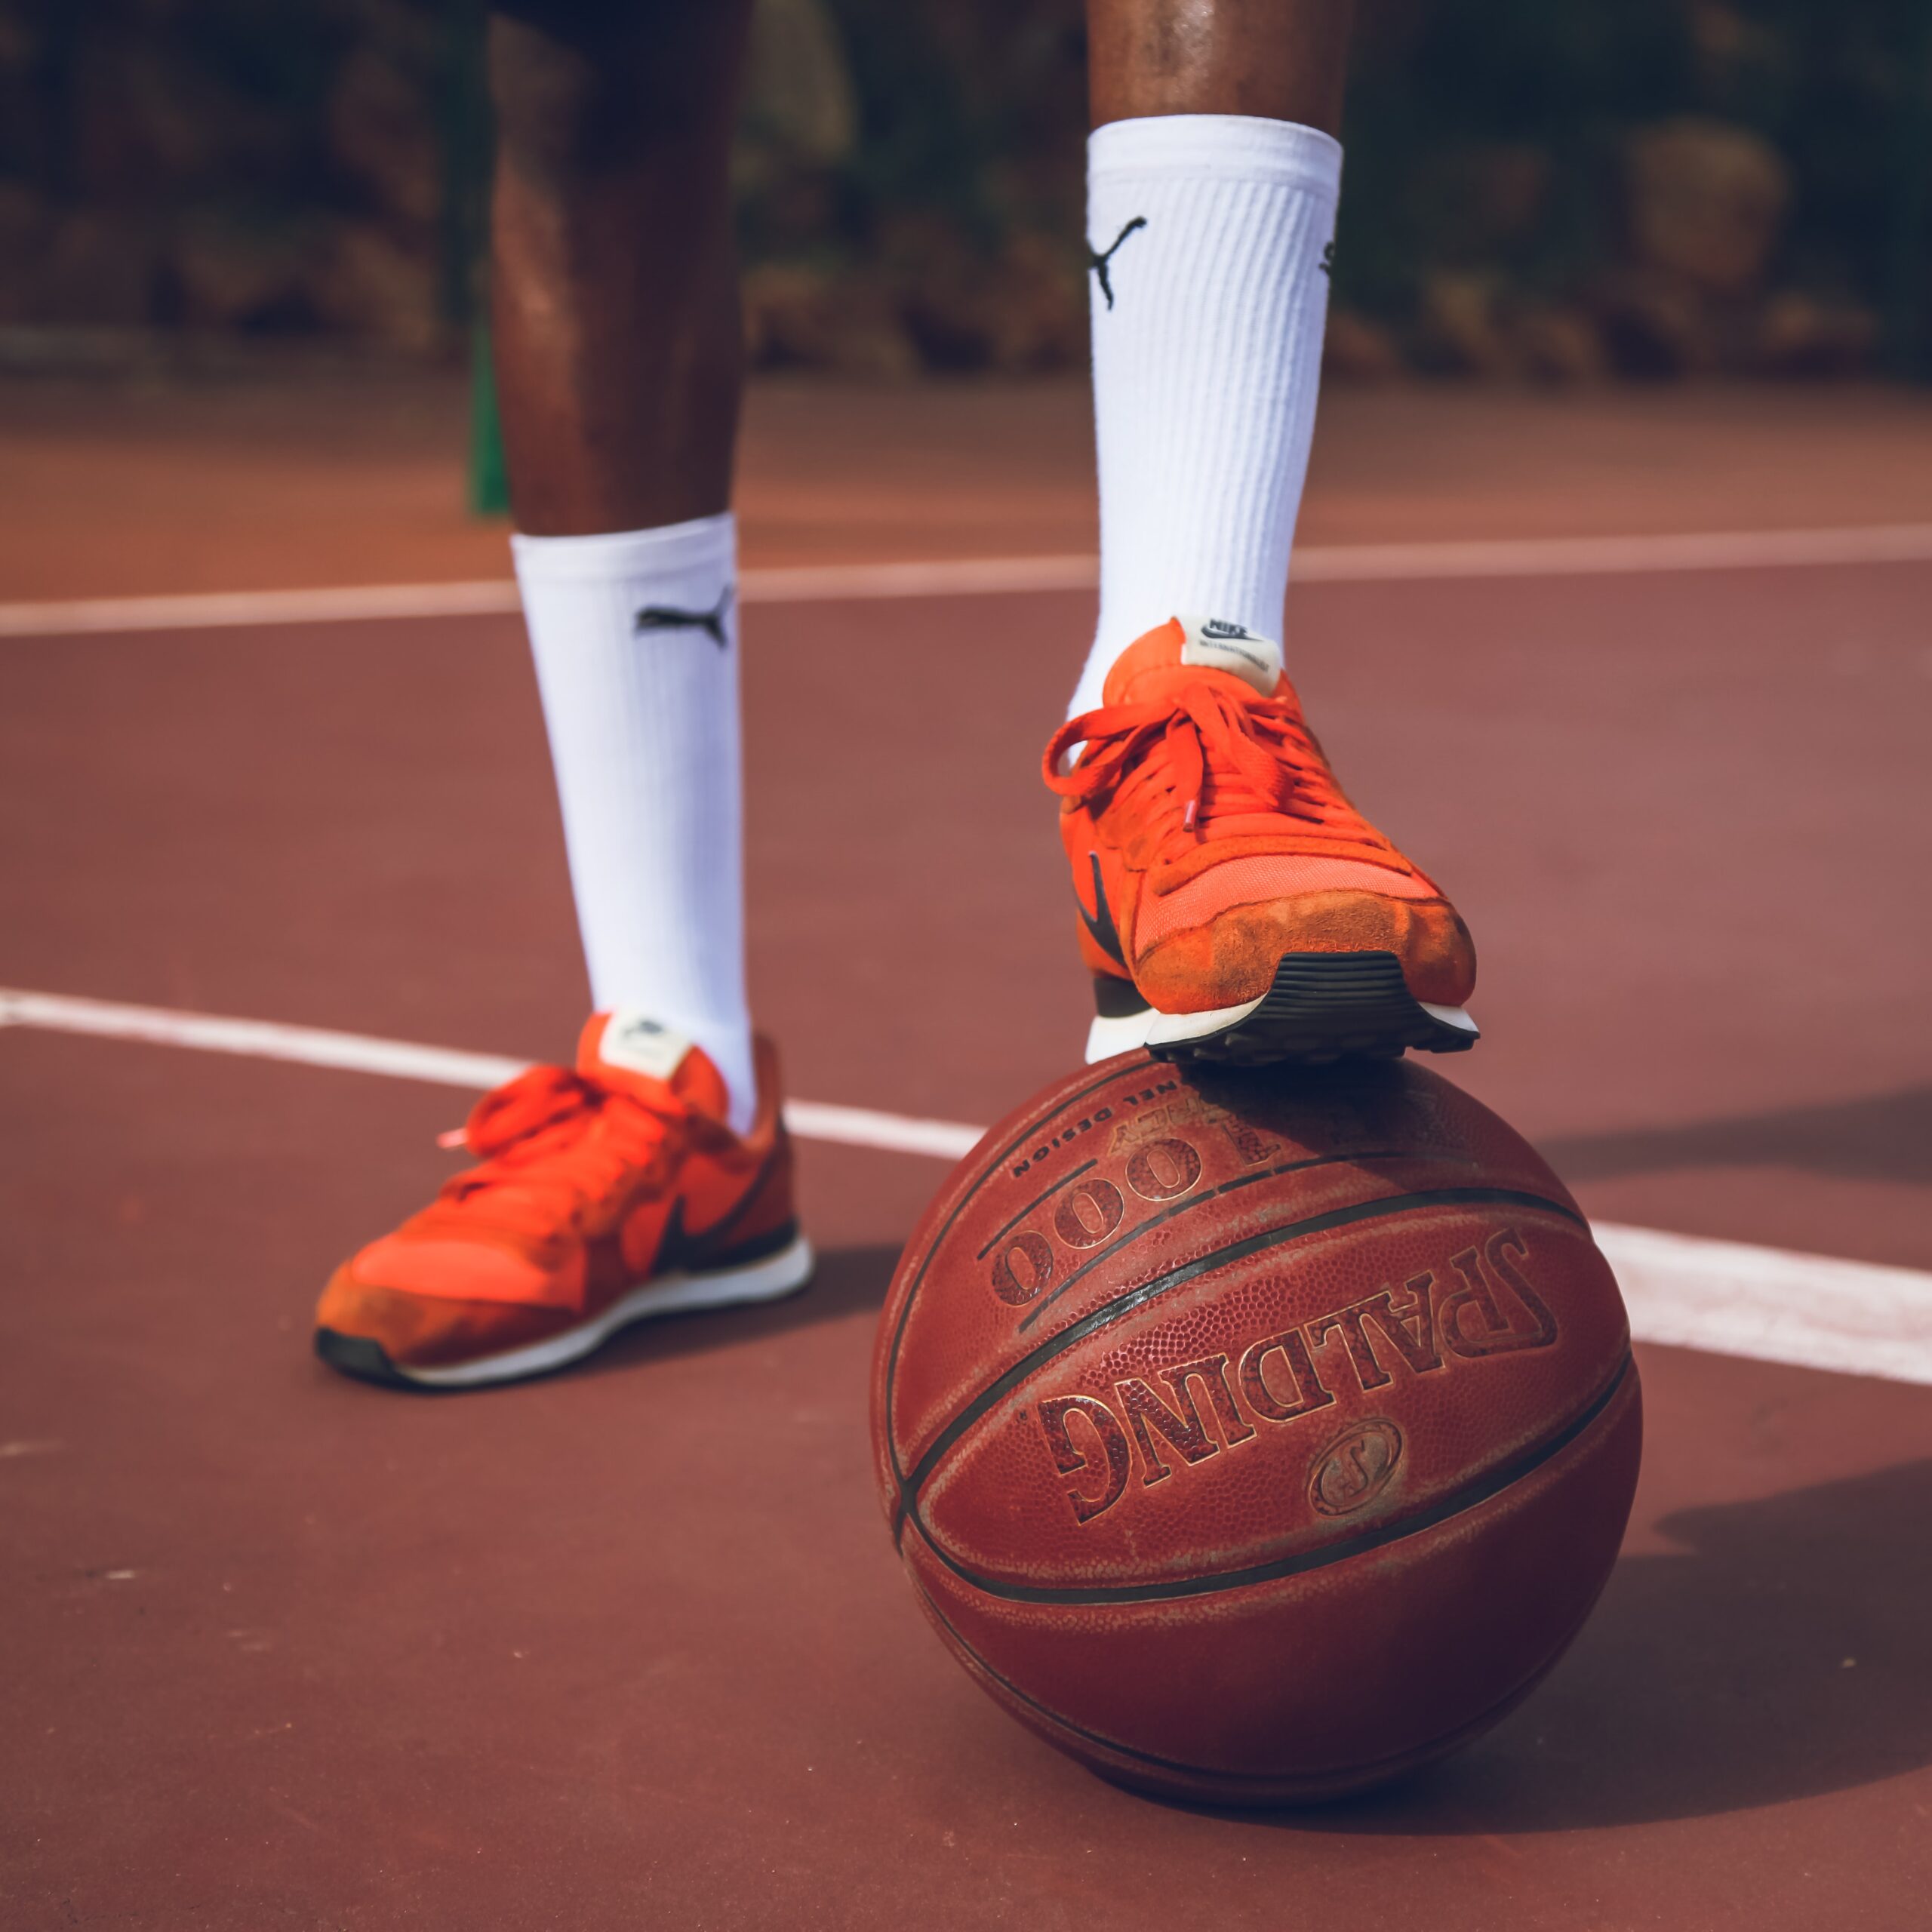 Best LIGHTWEIGHT Basketball Shoes Feel Lightning Quick with these Picks